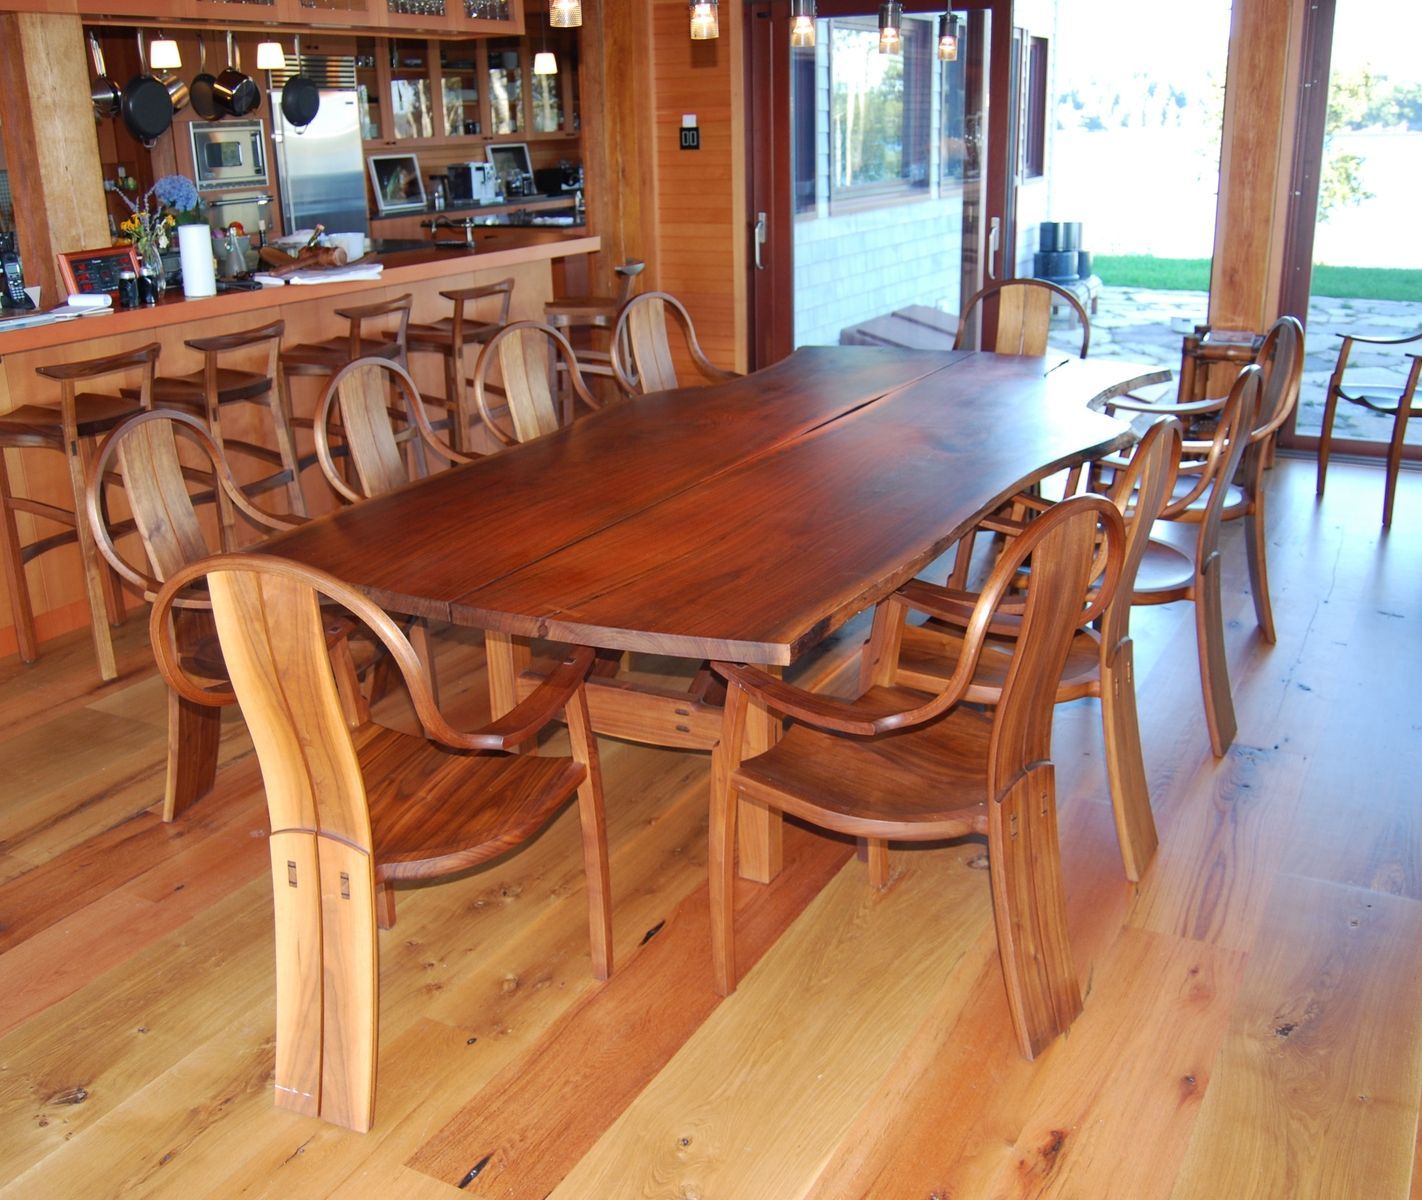 Handmade Walnut Dining Tablegeoffrey Warner Studio Intended For 2017 Walnut And White Dining Tables (View 2 of 15)